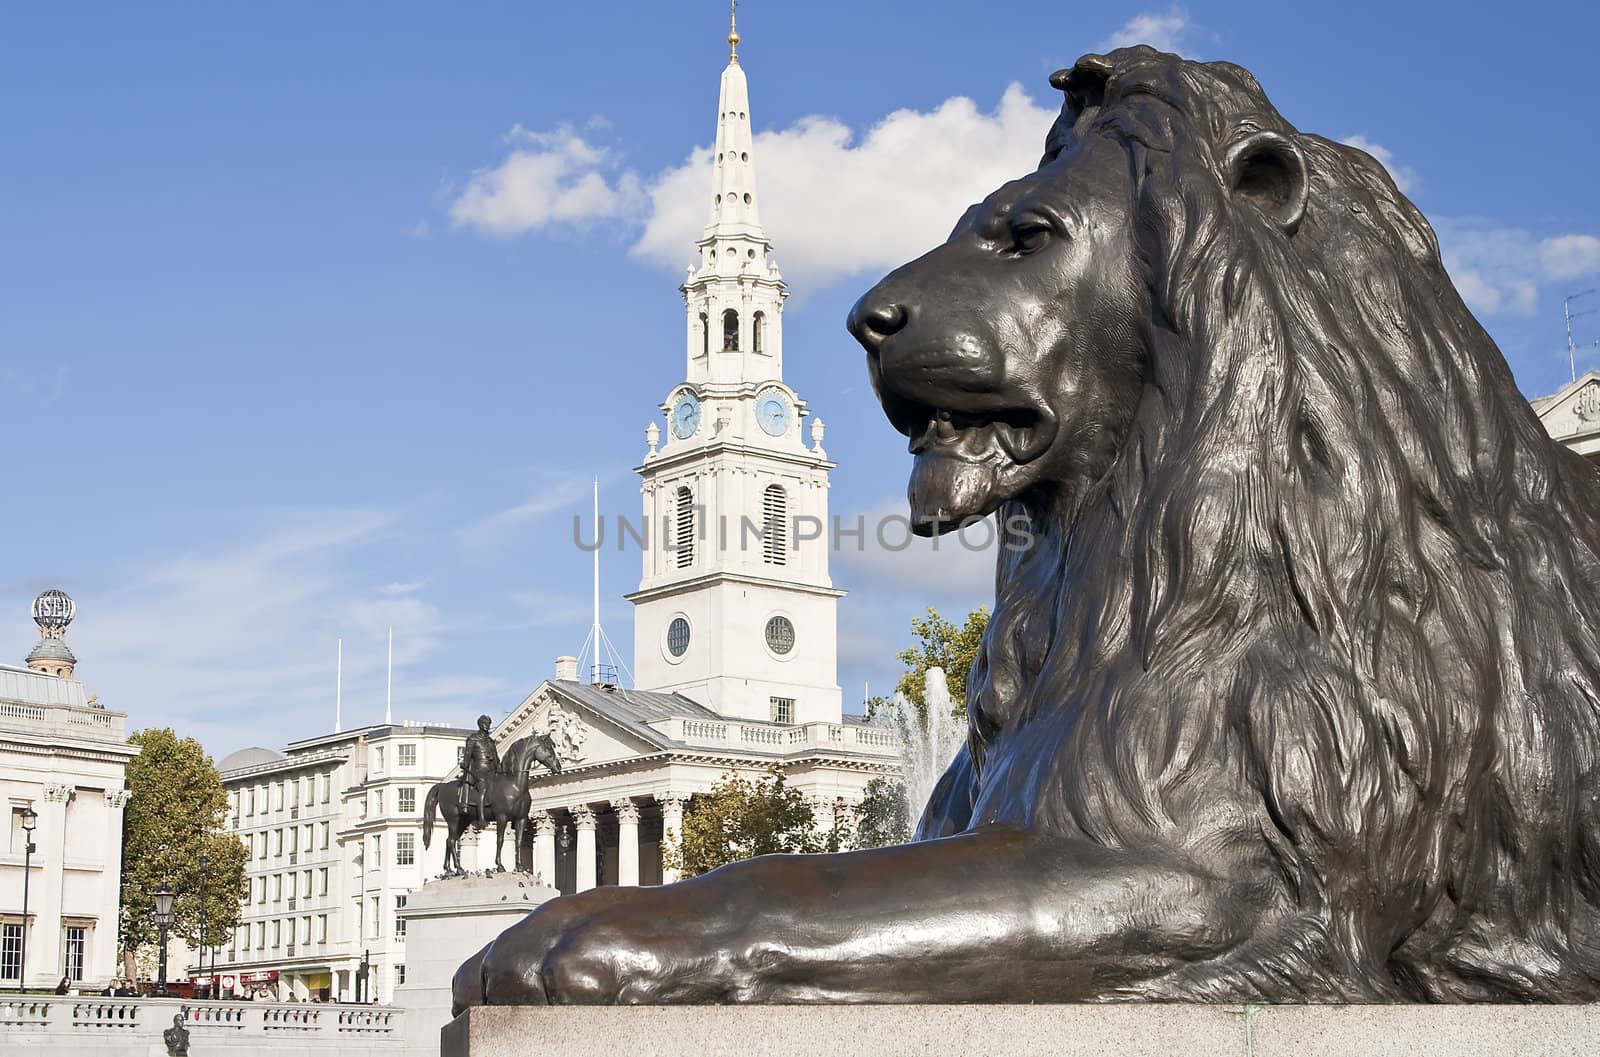 Statue of a lion in the Nelson column in Trafalgar Square in London